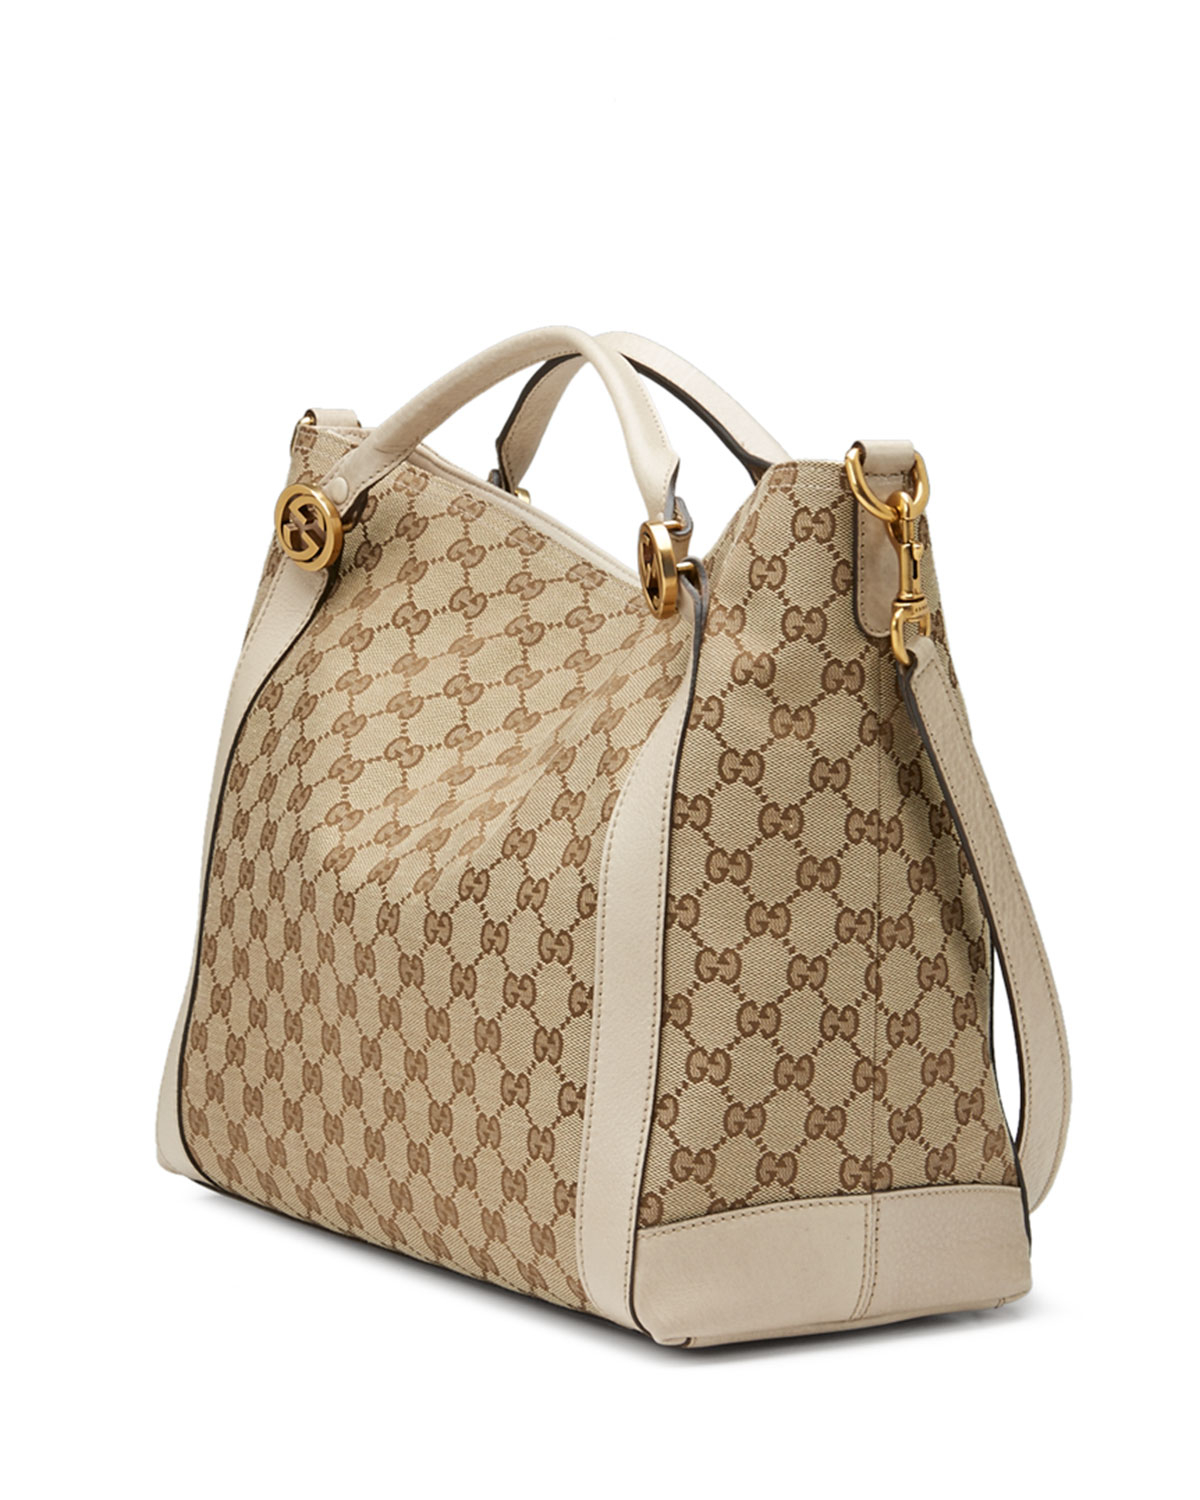 Lyst - Gucci Miss Gg Medium Canvas Tote Bag in Brown